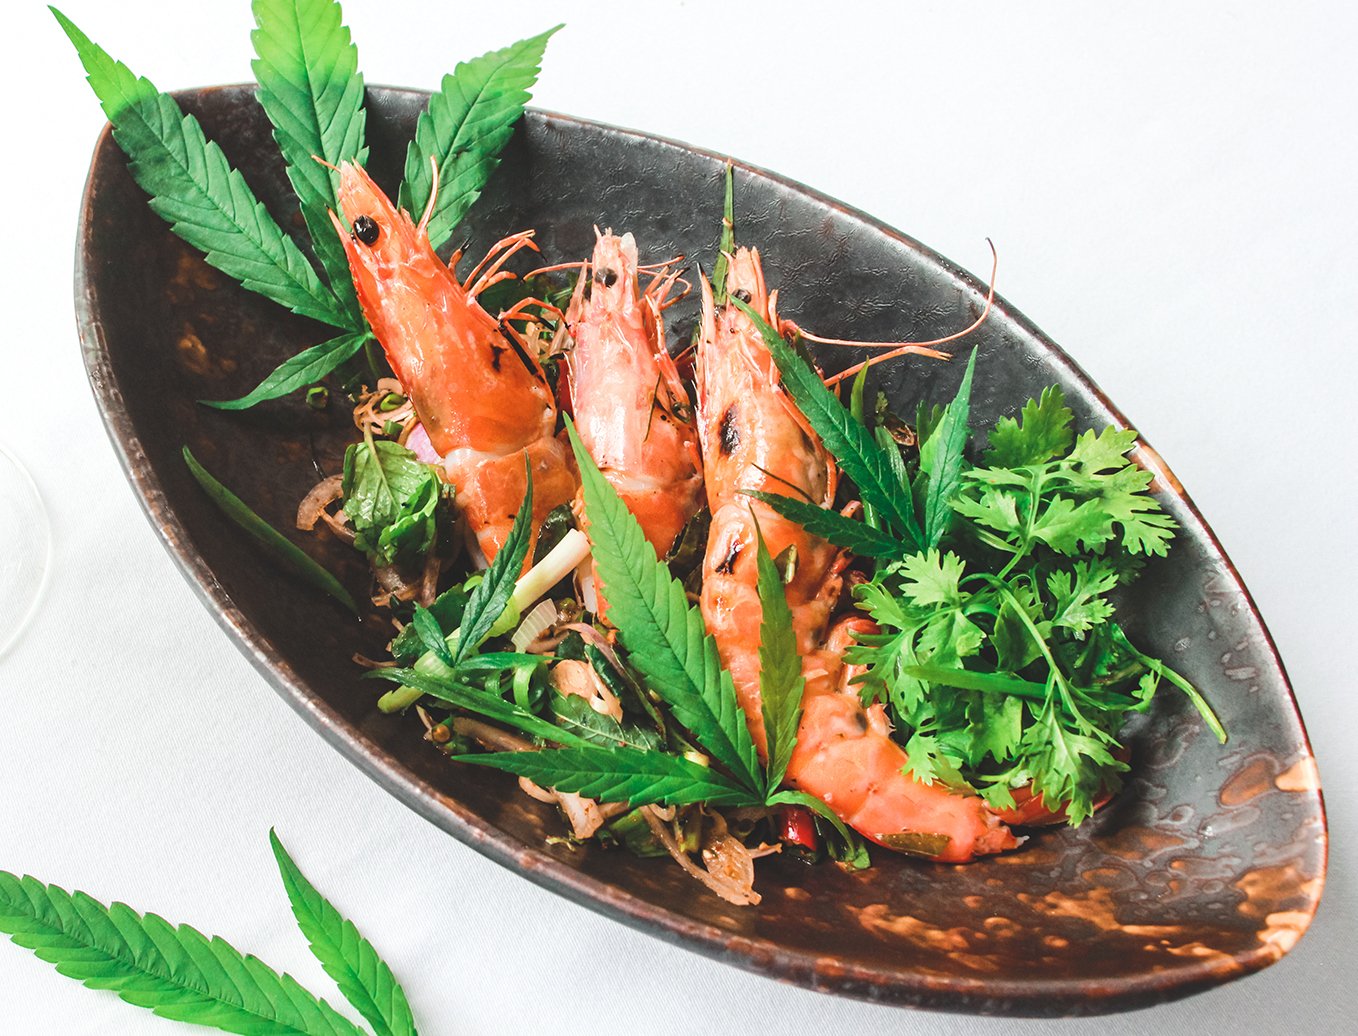 Spicy grilled prawn with traditional Thai herbs and Cannabis - The Service 1921 Restaurant & Bar, Anantara Chiang Mai Resort